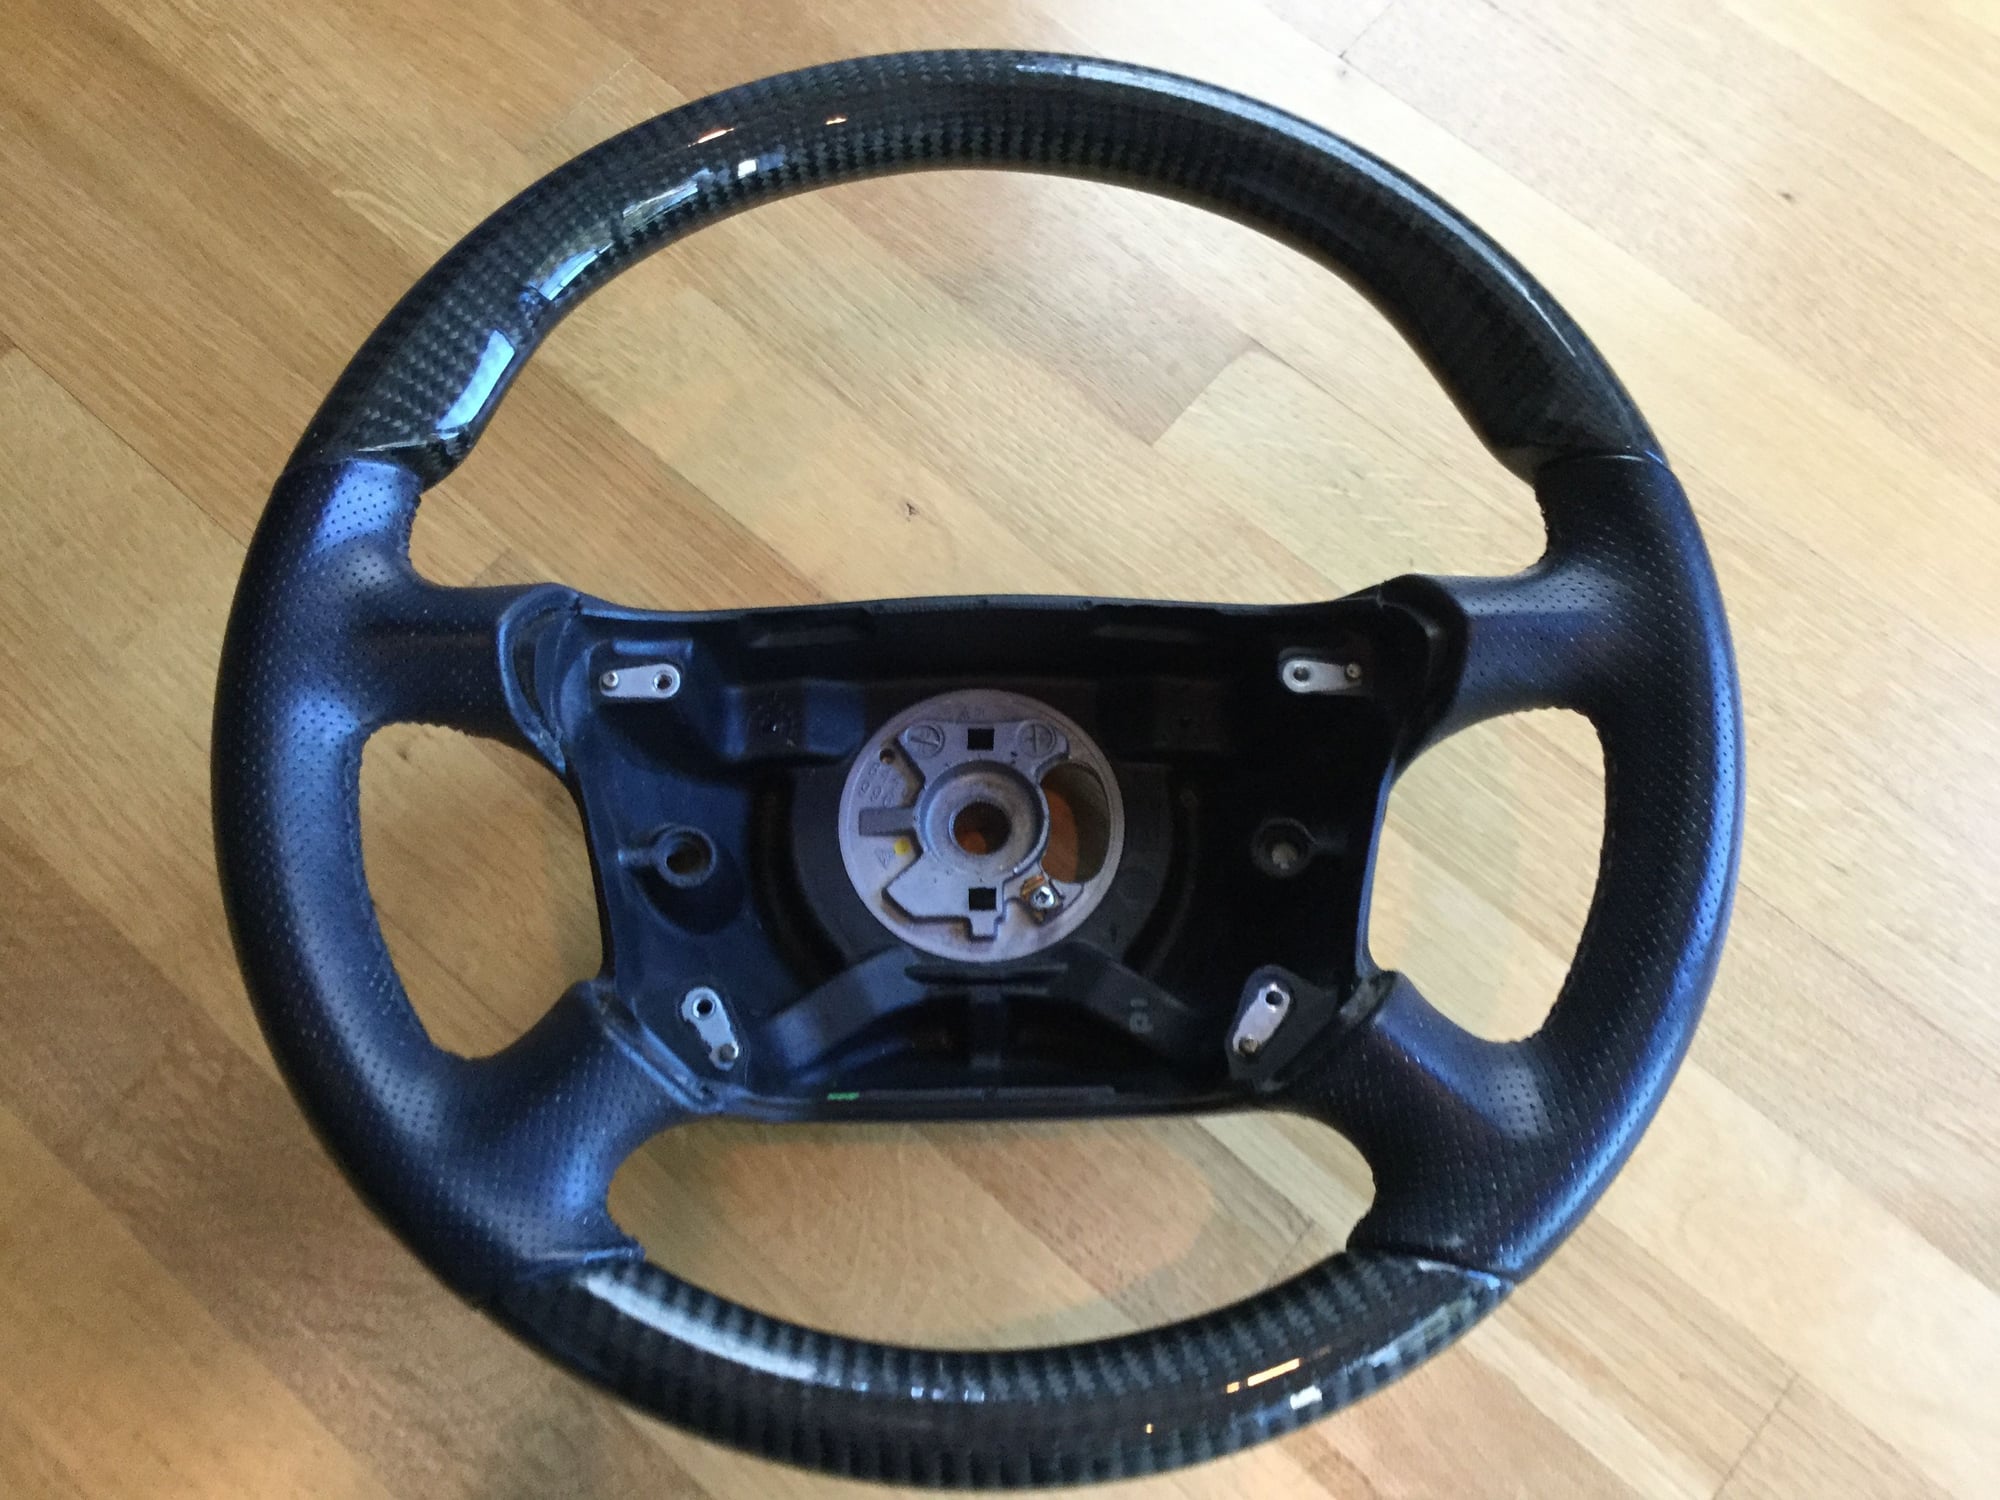 Accessories - EXCELLENT CONDITION CARBON FIBER & LEATHER 4 SPOKE STEERING WHEEL 993, 996, 986 - Used - All Years Porsche All Models - Piedmont, CA 94611, United States